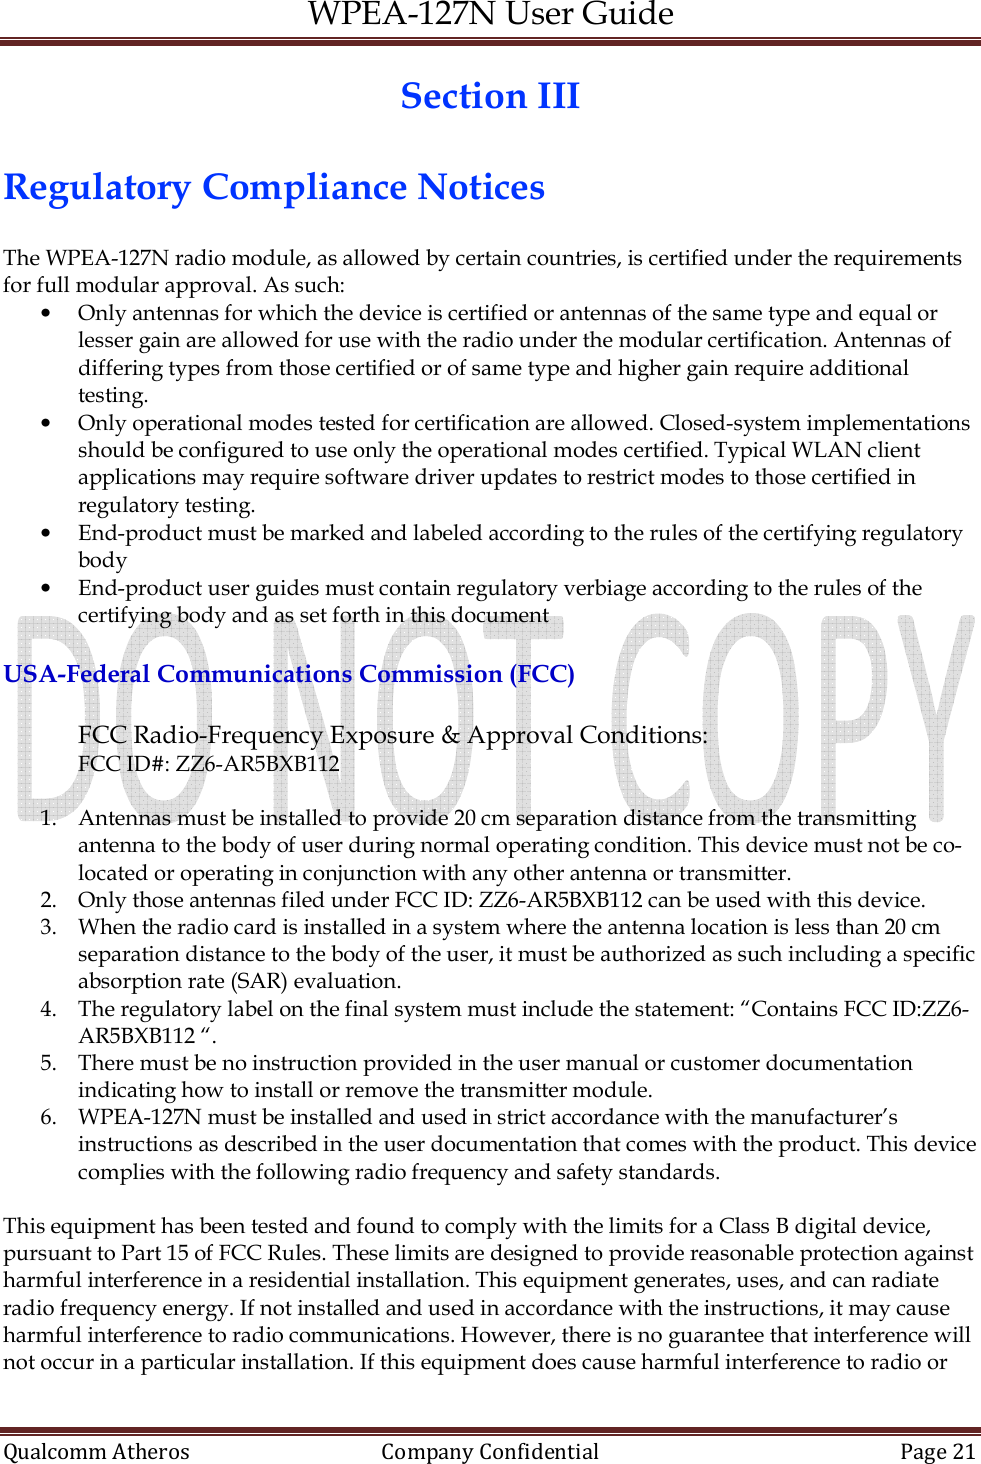 WPEA-127N User Guide  Qualcomm Atheros   Company Confidential  Page 21  Section III  Regulatory Compliance Notices  The WPEA-127N radio module, as allowed by certain countries, is certified under the requirements for full modular approval. As such: • Only antennas for which the device is certified or antennas of the same type and equal or lesser gain are allowed for use with the radio under the modular certification. Antennas of differing types from those certified or of same type and higher gain require additional testing. • Only operational modes tested for certification are allowed. Closed-system implementations should be configured to use only the operational modes certified. Typical WLAN client applications may require software driver updates to restrict modes to those certified in regulatory testing. • End-product must be marked and labeled according to the rules of the certifying regulatory body • End-product user guides must contain regulatory verbiage according to the rules of the certifying body and as set forth in this document  USA-Federal Communications Commission (FCC)  FCC Radio-Frequency Exposure &amp; Approval Conditions: FCC ID#: ZZ6-AR5BXB112  1. Antennas must be installed to provide 20 cm separation distance from the transmitting antenna to the body of user during normal operating condition. This device must not be co-located or operating in conjunction with any other antenna or transmitter. 2. Only those antennas filed under FCC ID: ZZ6-AR5BXB112 can be used with this device. 3. When the radio card is installed in a system where the antenna location is less than 20 cm separation distance to the body of the user, it must be authorized as such including a specific absorption rate (SAR) evaluation. 4. The regulatory label on the final system must include the statement: “Contains FCC ID:ZZ6-AR5BXB112 “. 5. There must be no instruction provided in the user manual or customer documentation indicating how to install or remove the transmitter module. 6. WPEA-127N must be installed and used in strict accordance with the manufacturer’s instructions as described in the user documentation that comes with the product. This device complies with the following radio frequency and safety standards.  This equipment has been tested and found to comply with the limits for a Class B digital device, pursuant to Part 15 of FCC Rules. These limits are designed to provide reasonable protection against harmful interference in a residential installation. This equipment generates, uses, and can radiate radio frequency energy. If not installed and used in accordance with the instructions, it may cause harmful interference to radio communications. However, there is no guarantee that interference will not occur in a particular installation. If this equipment does cause harmful interference to radio or 